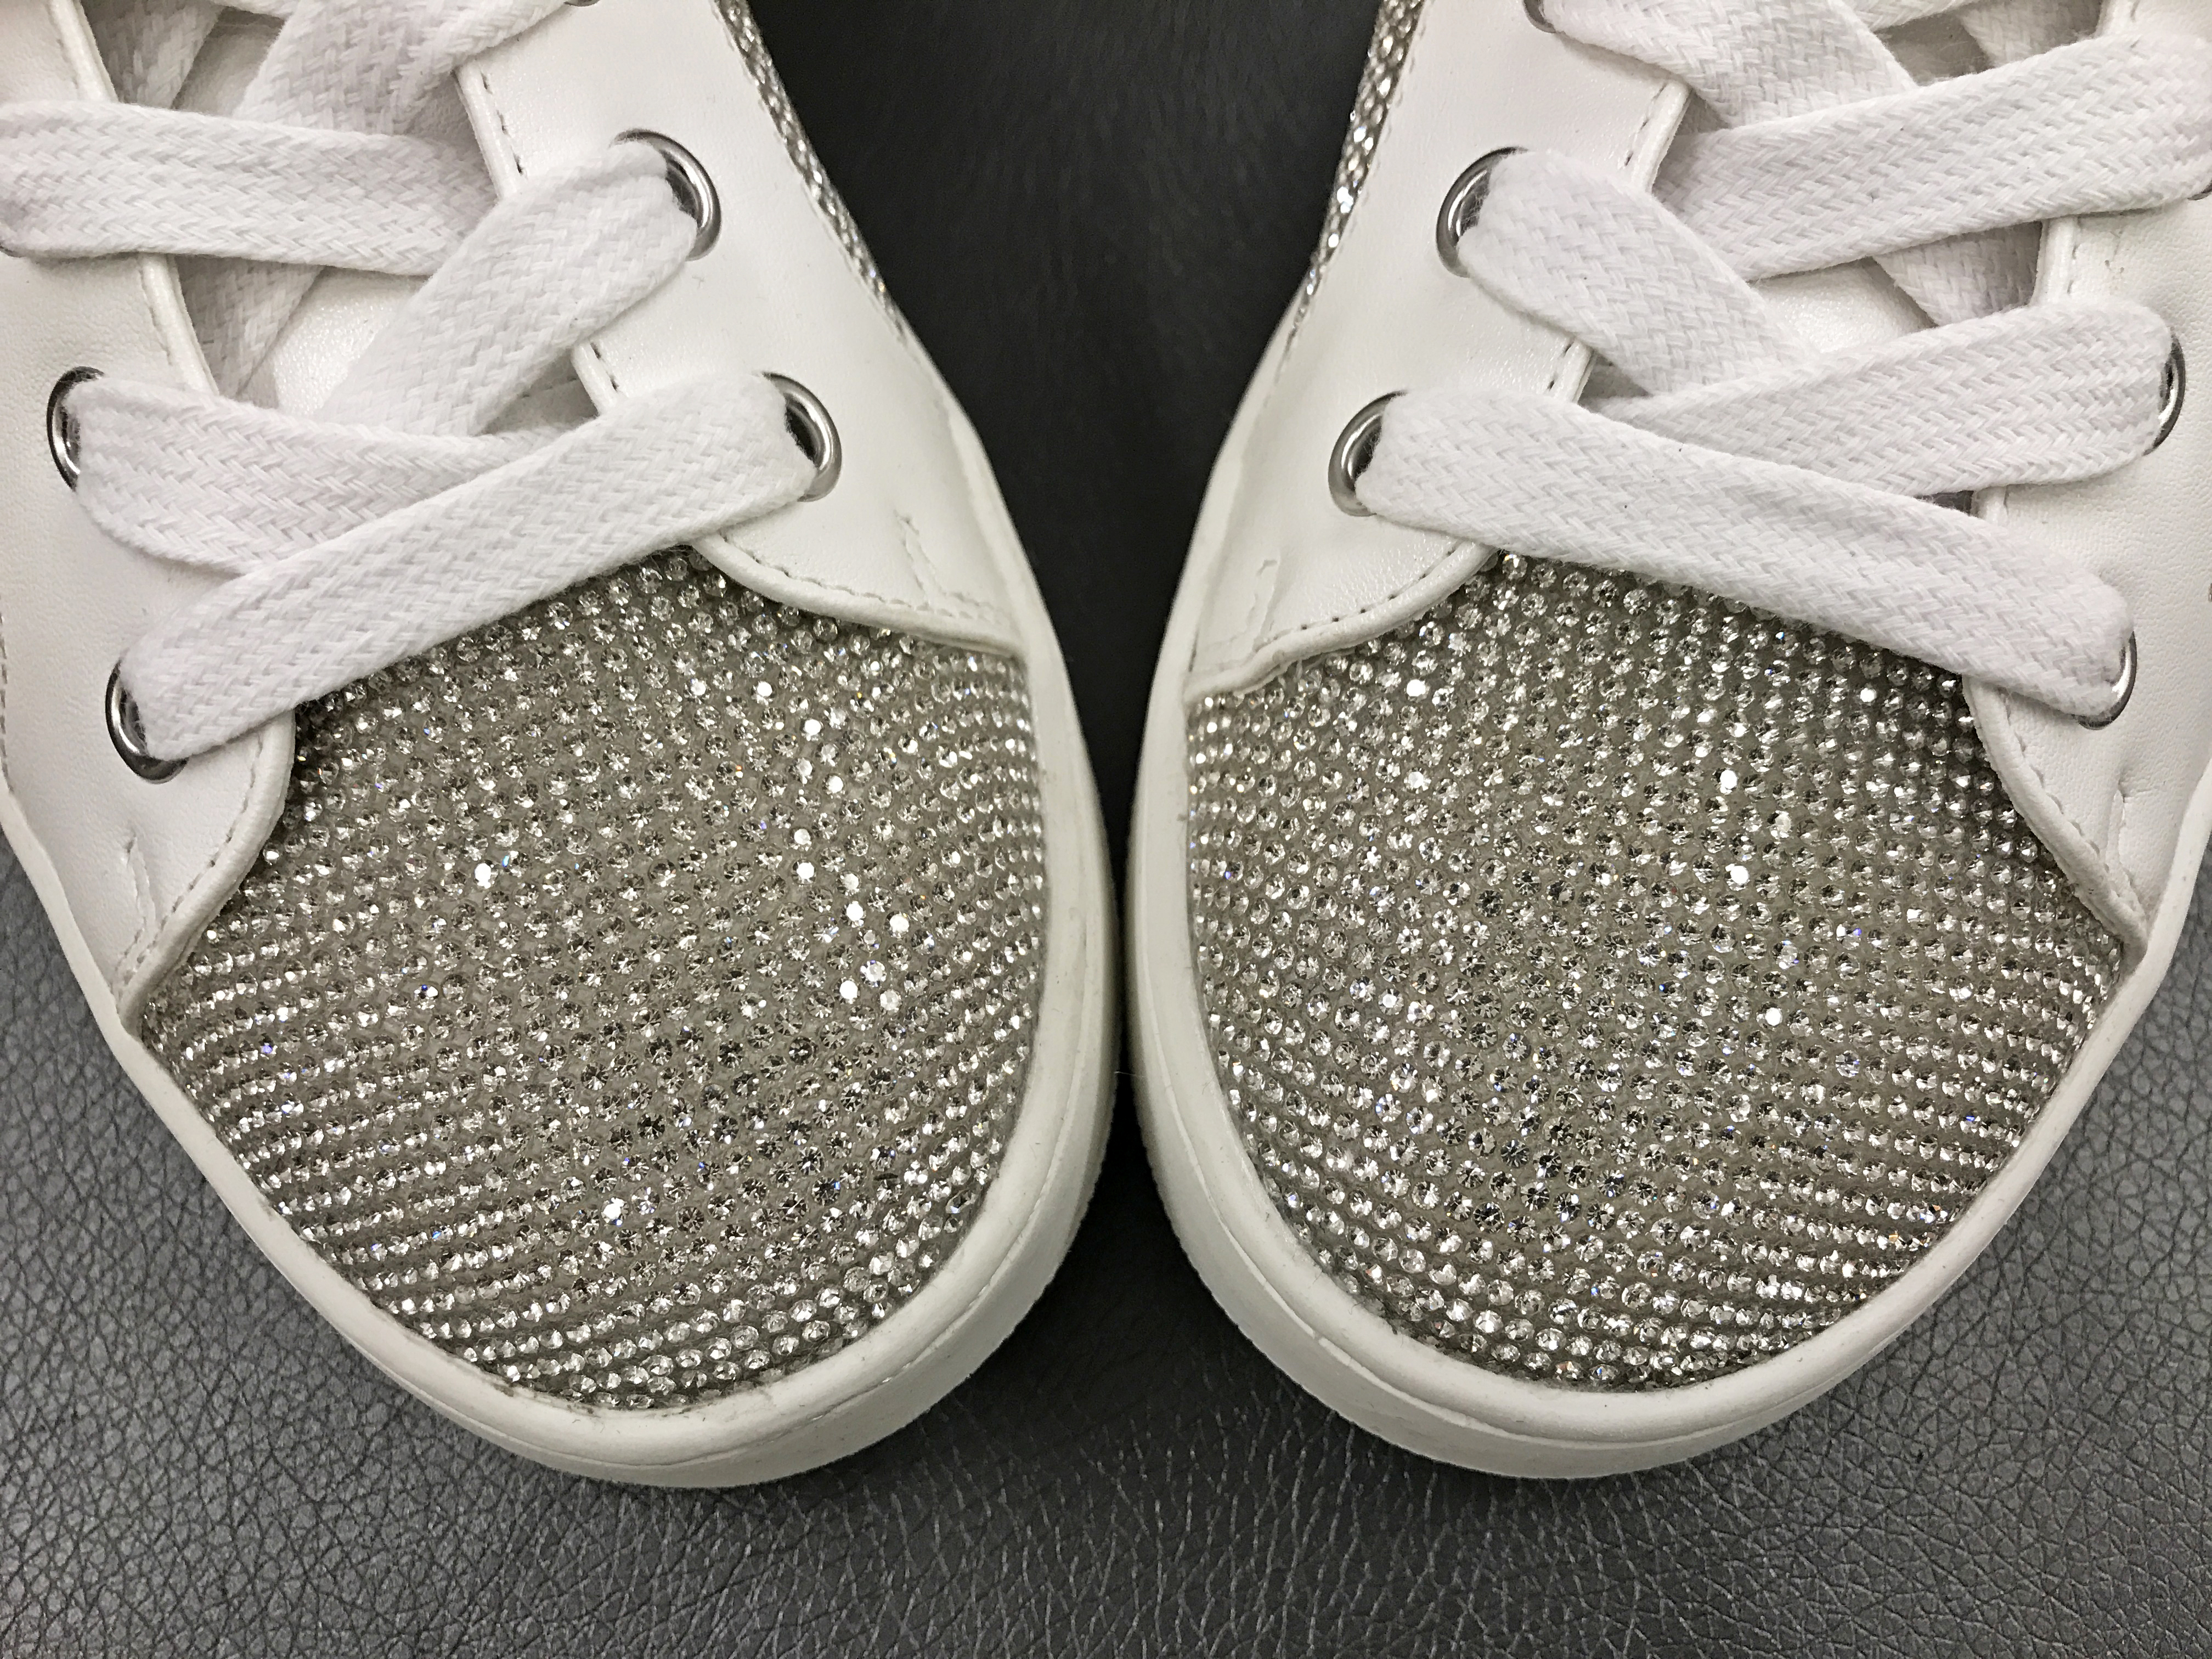 What's the best way to attach rhinestones to stretch knit fabric I will use  for dancing? Iron-on hotfix ones or glue on flat back rhinestones with  E6000? I need to cover A